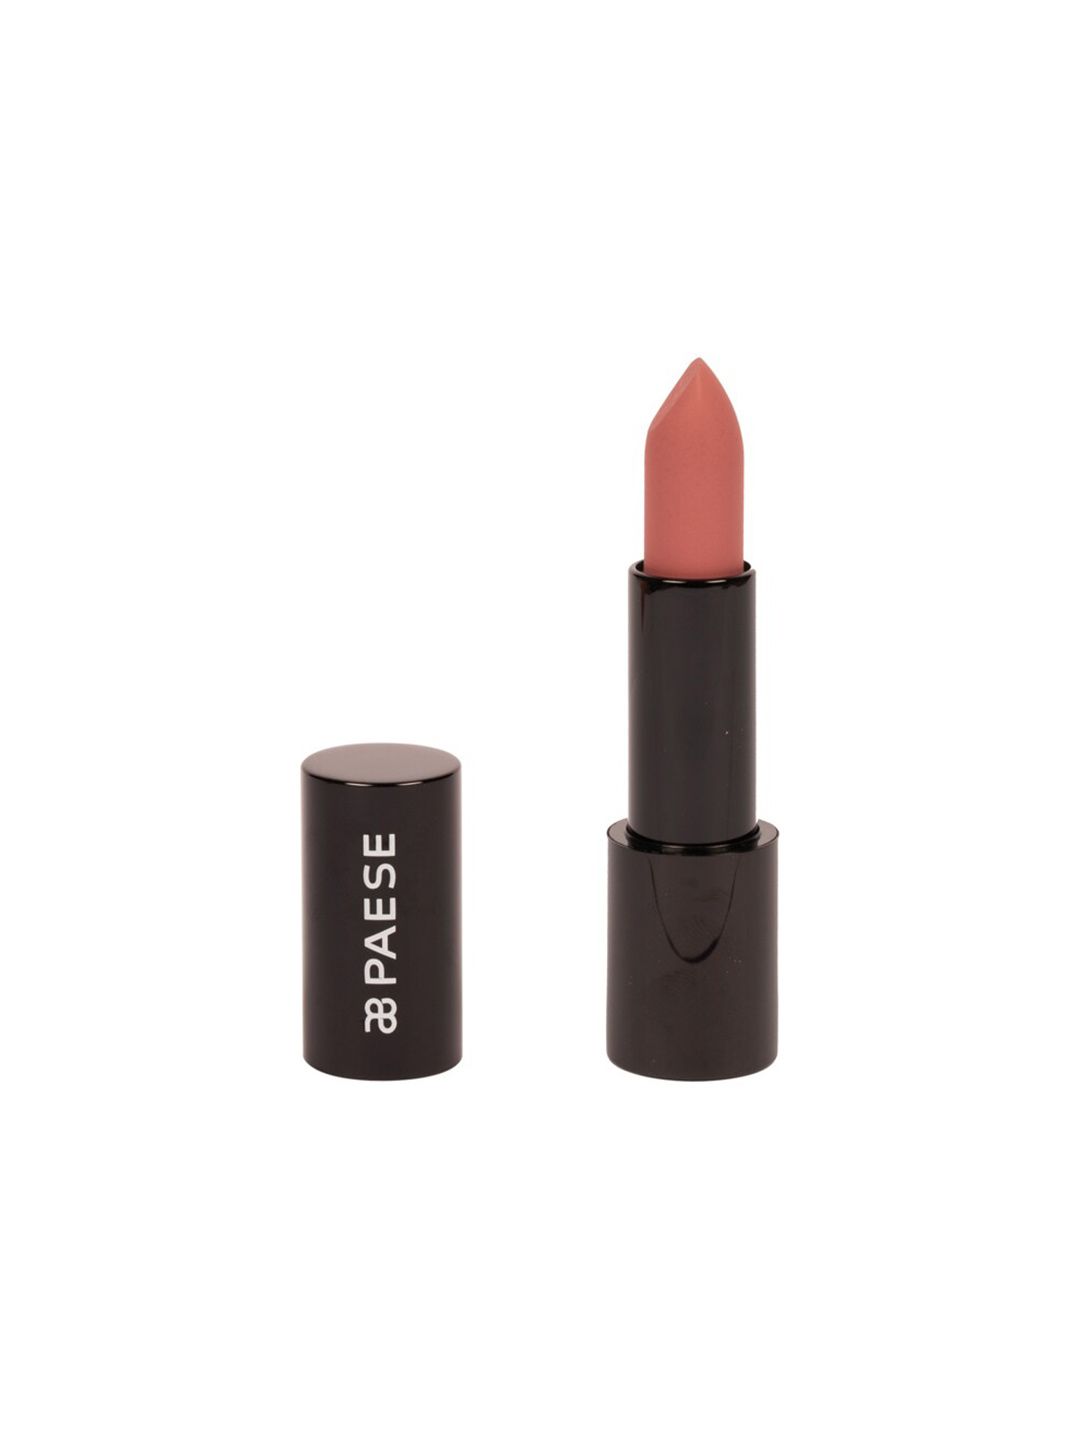 Paese Cosmetics Mattologie Matte Lipstick with Rice Oil 4.3 g - No Make Up Nude 107 Price in India